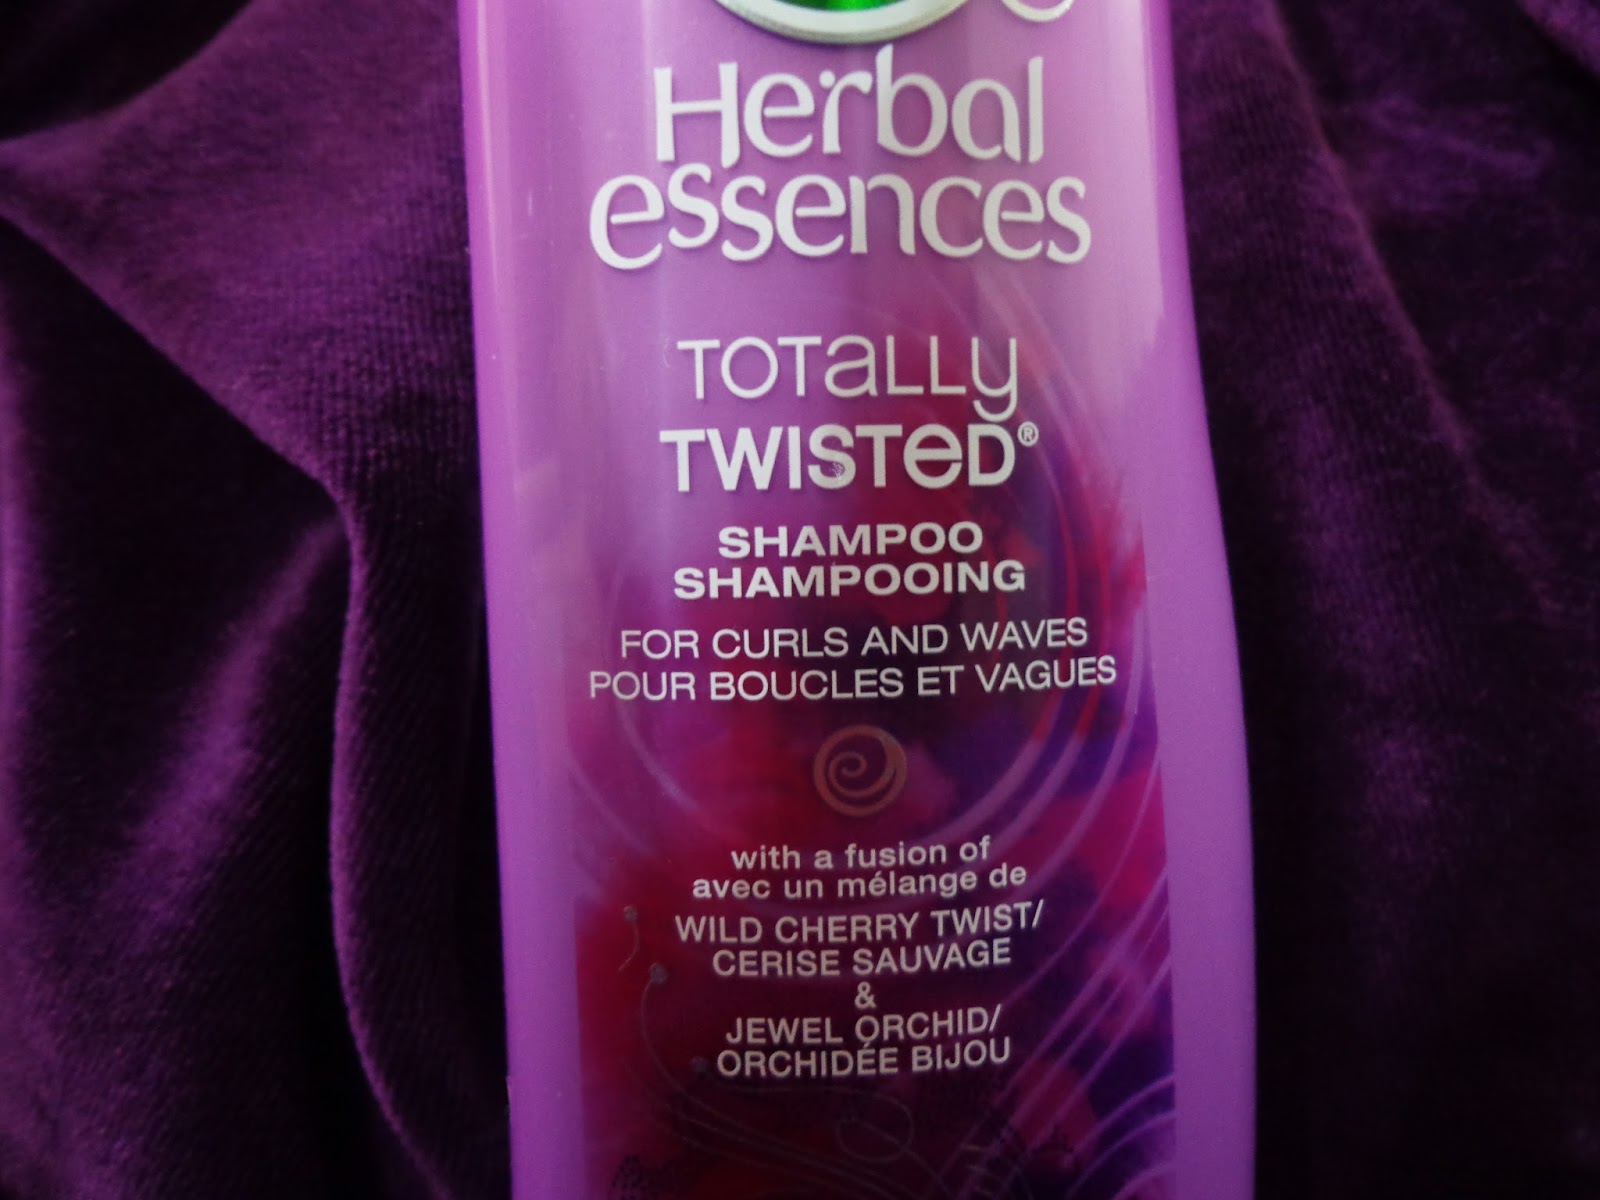 6. "Herbal Essences Totally Twisted Curl Shampoo" - wide 4